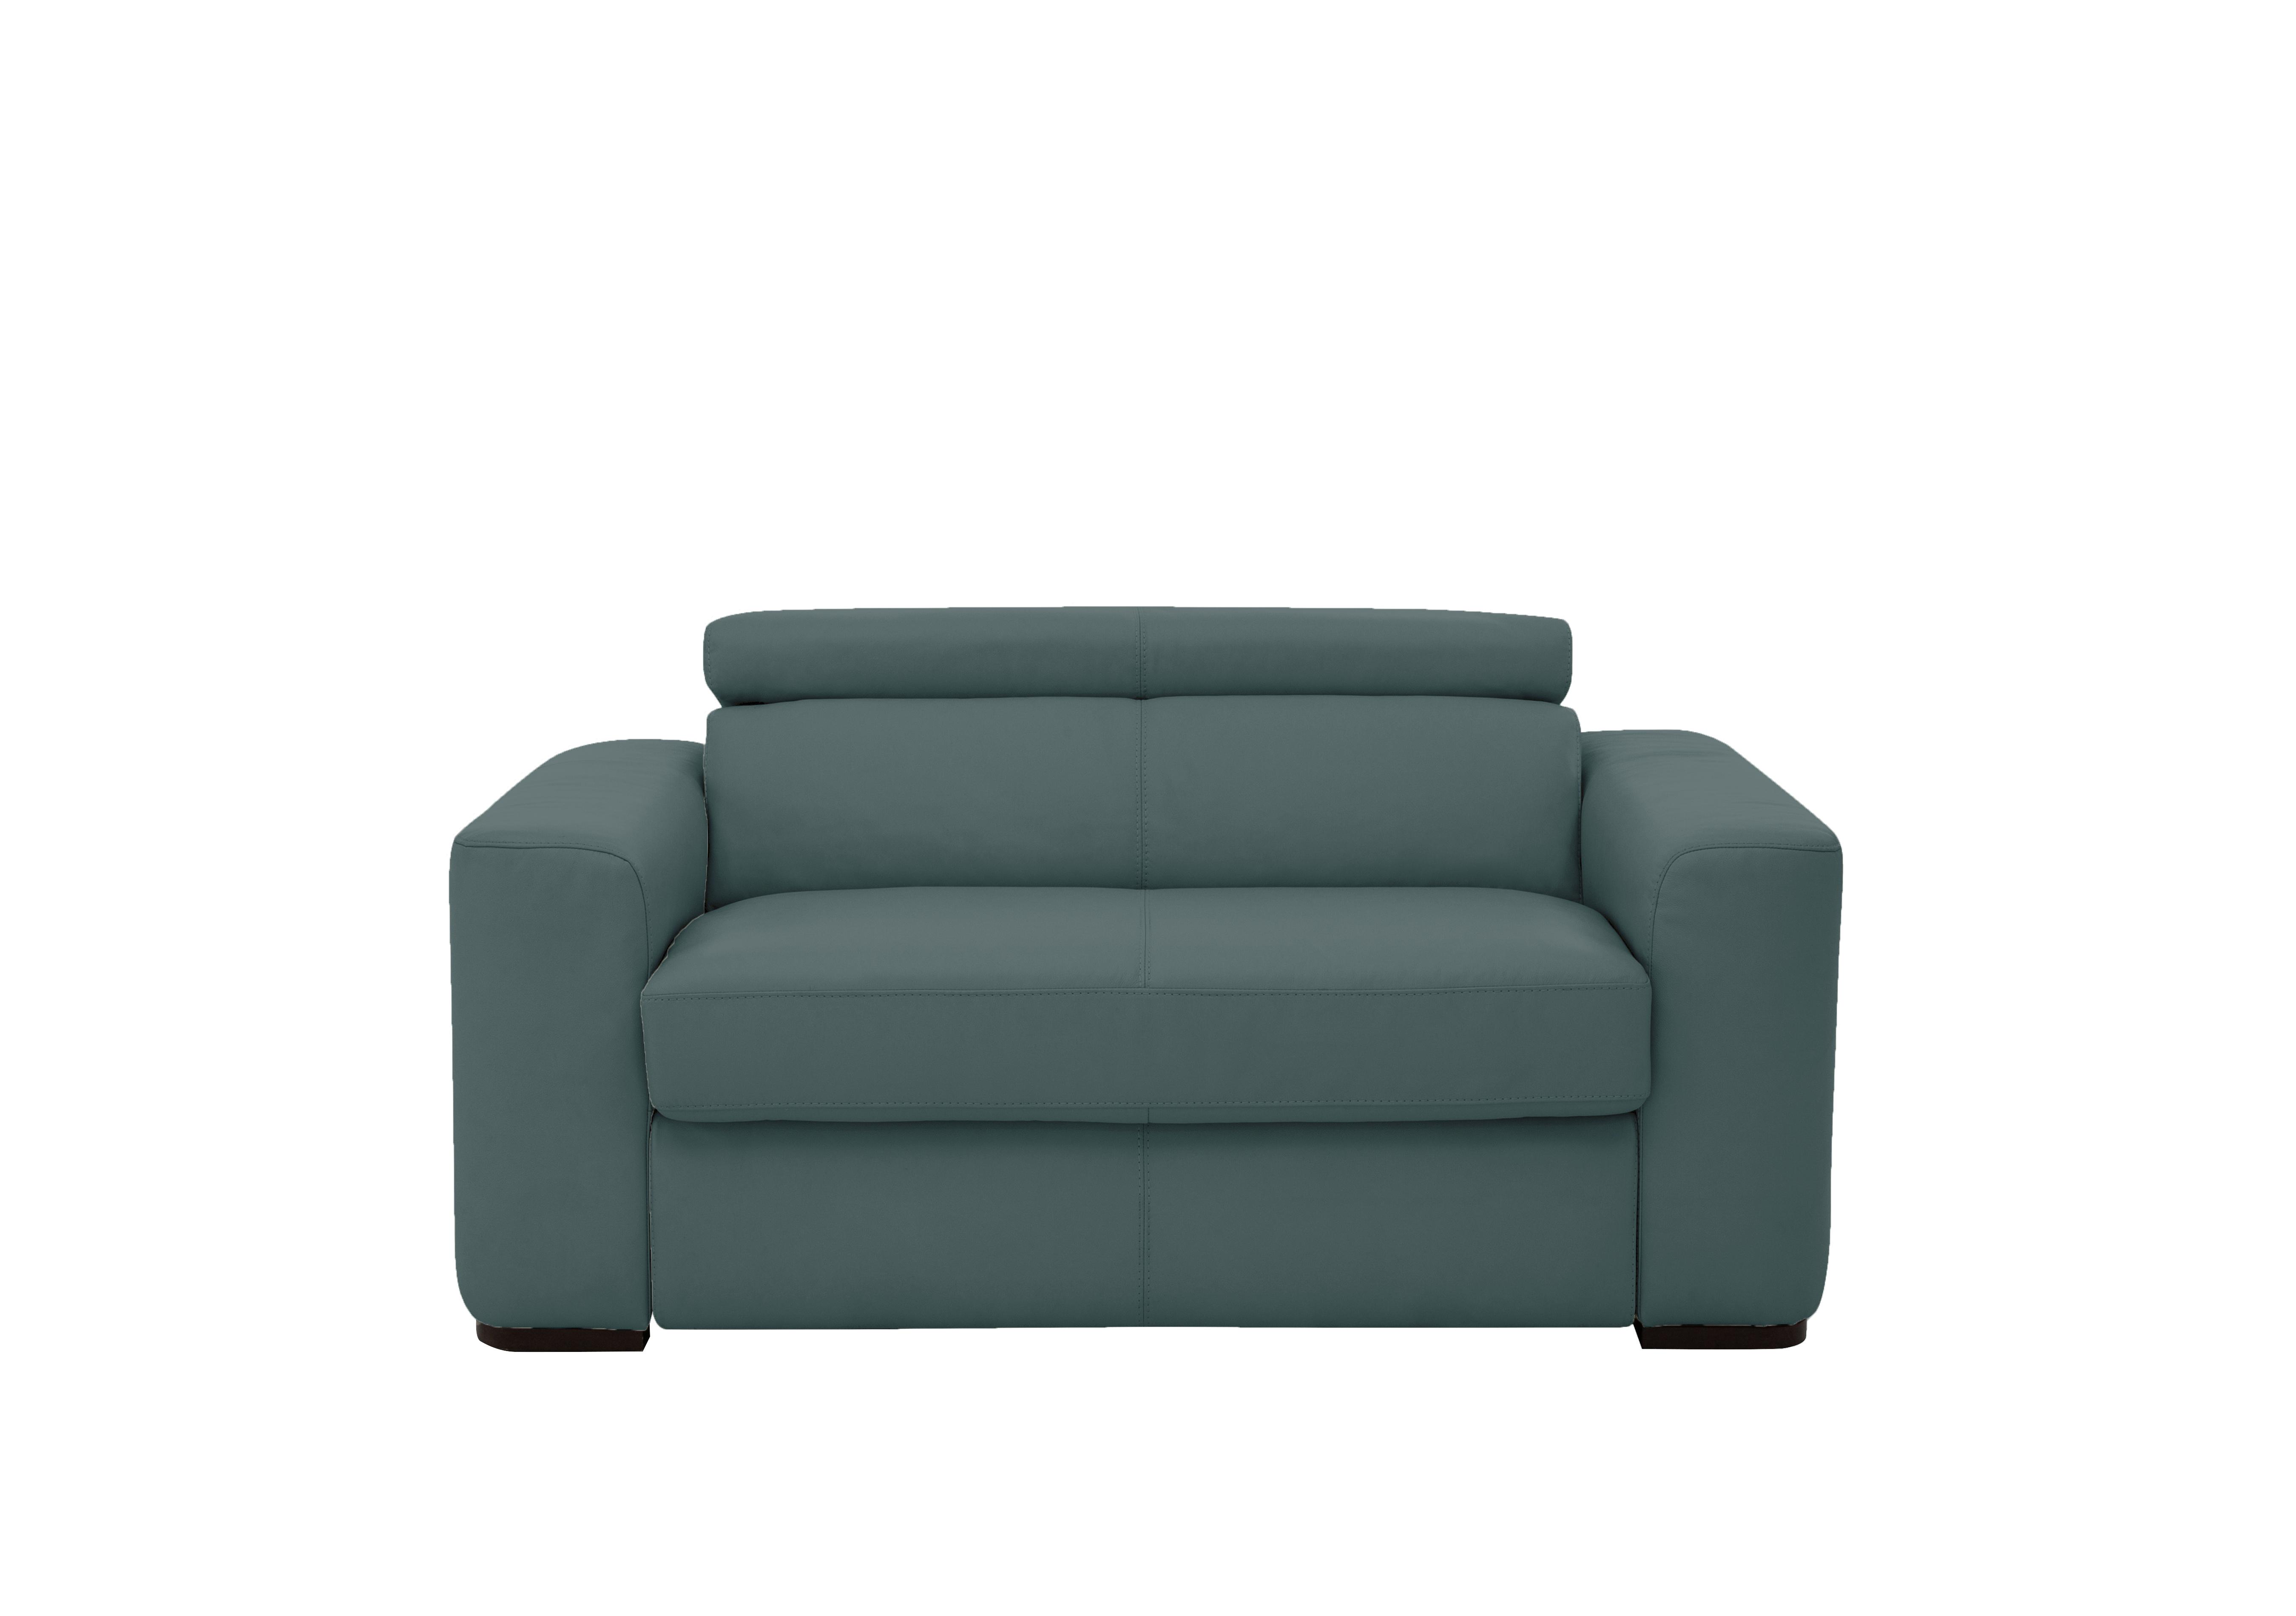 Infinity Large Leather Armchair in Bv-301e Lake Green on Furniture Village